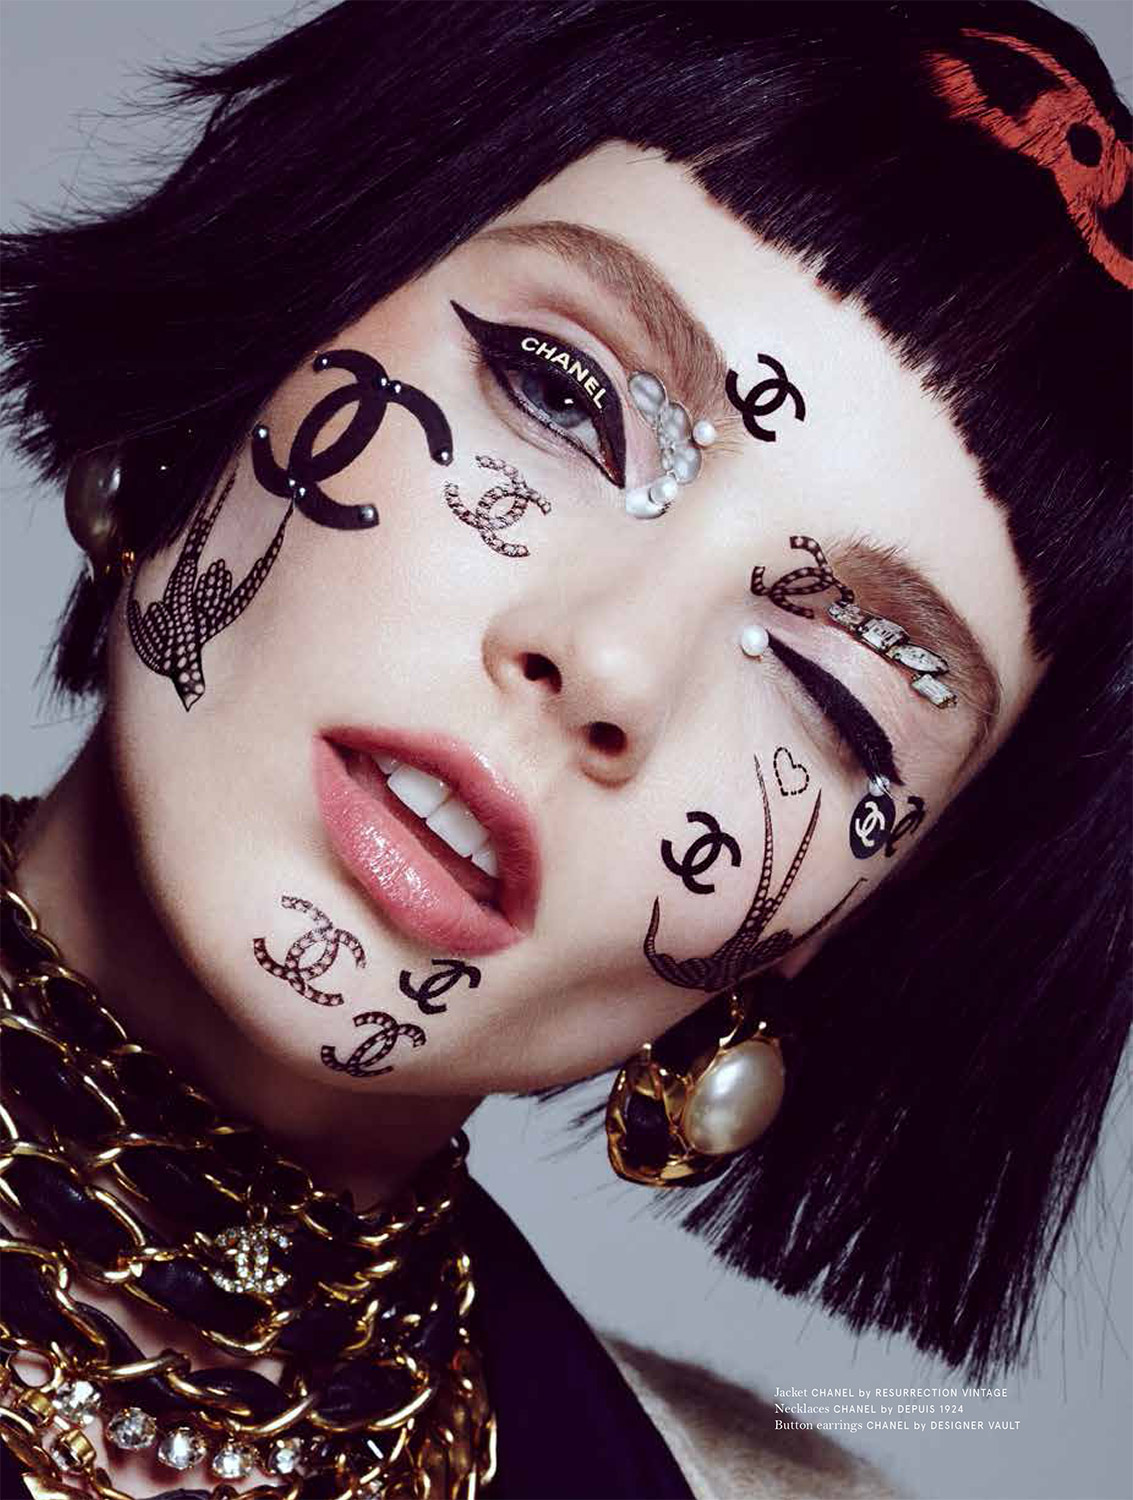 Chanel Temporary Tattoos Beauty Editorial Shoot with model Enly